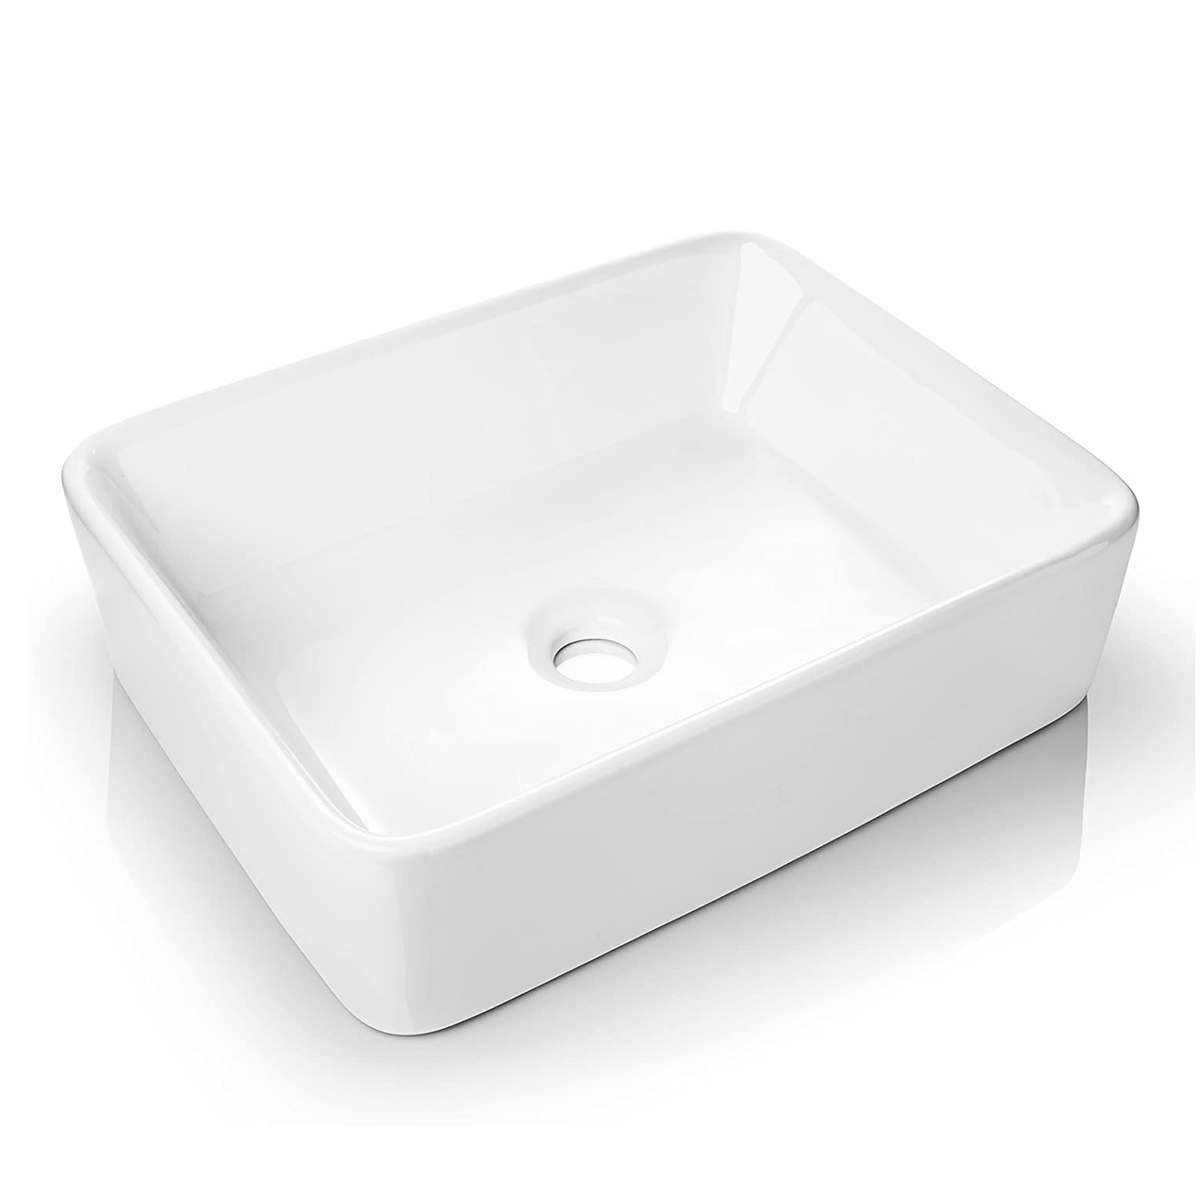 How to Choose the Perfect Bathroom Sink for Your Renovation?